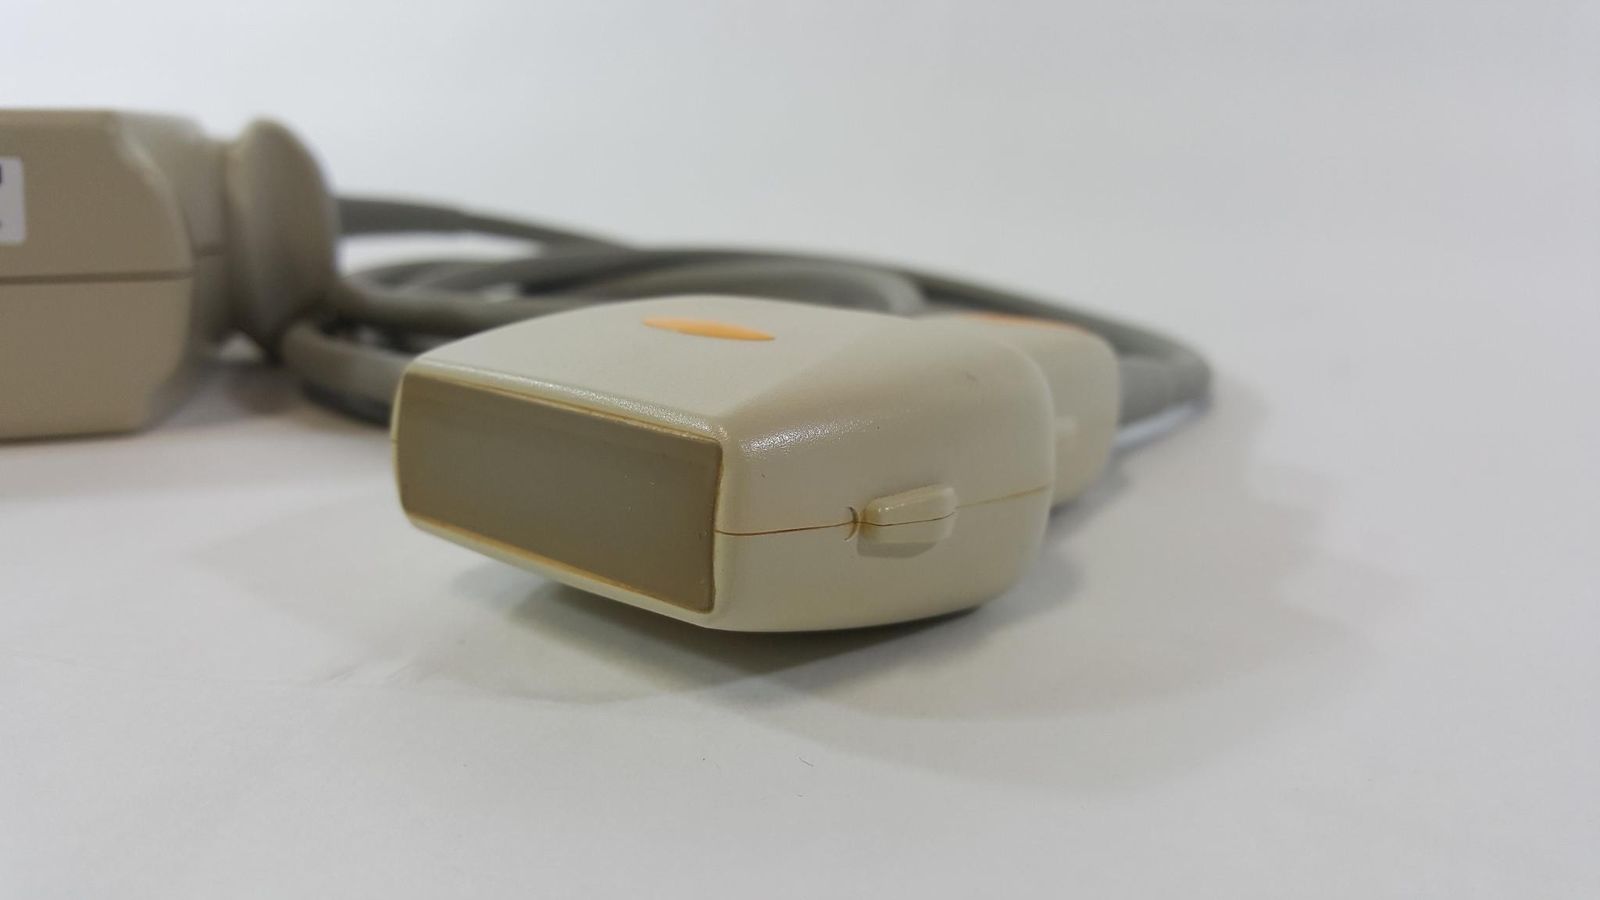 Toshiba PLT-604AT 6MHz Linear Ultrasound Transducer Probe DIAGNOSTIC ULTRASOUND MACHINES FOR SALE